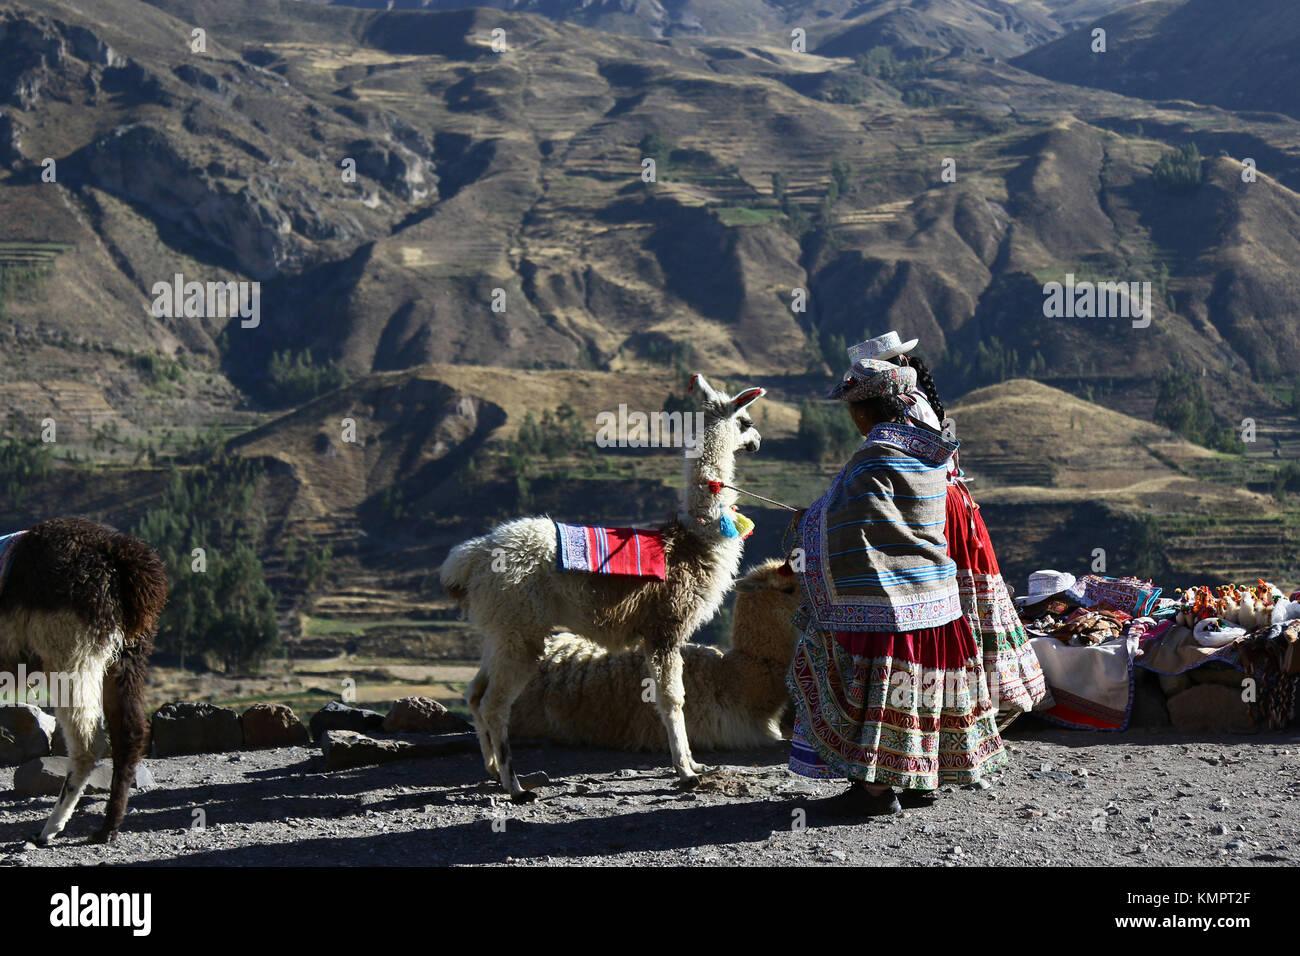 Pinchollo ( Peru) November, 18th 2015; Landscape of the Colca Canyon in the Andes Cordilleras with  Peruvian textilles sellers with their llamas Credit: Sebastien Lapeyrere/Alamy Live News. Stock Photo